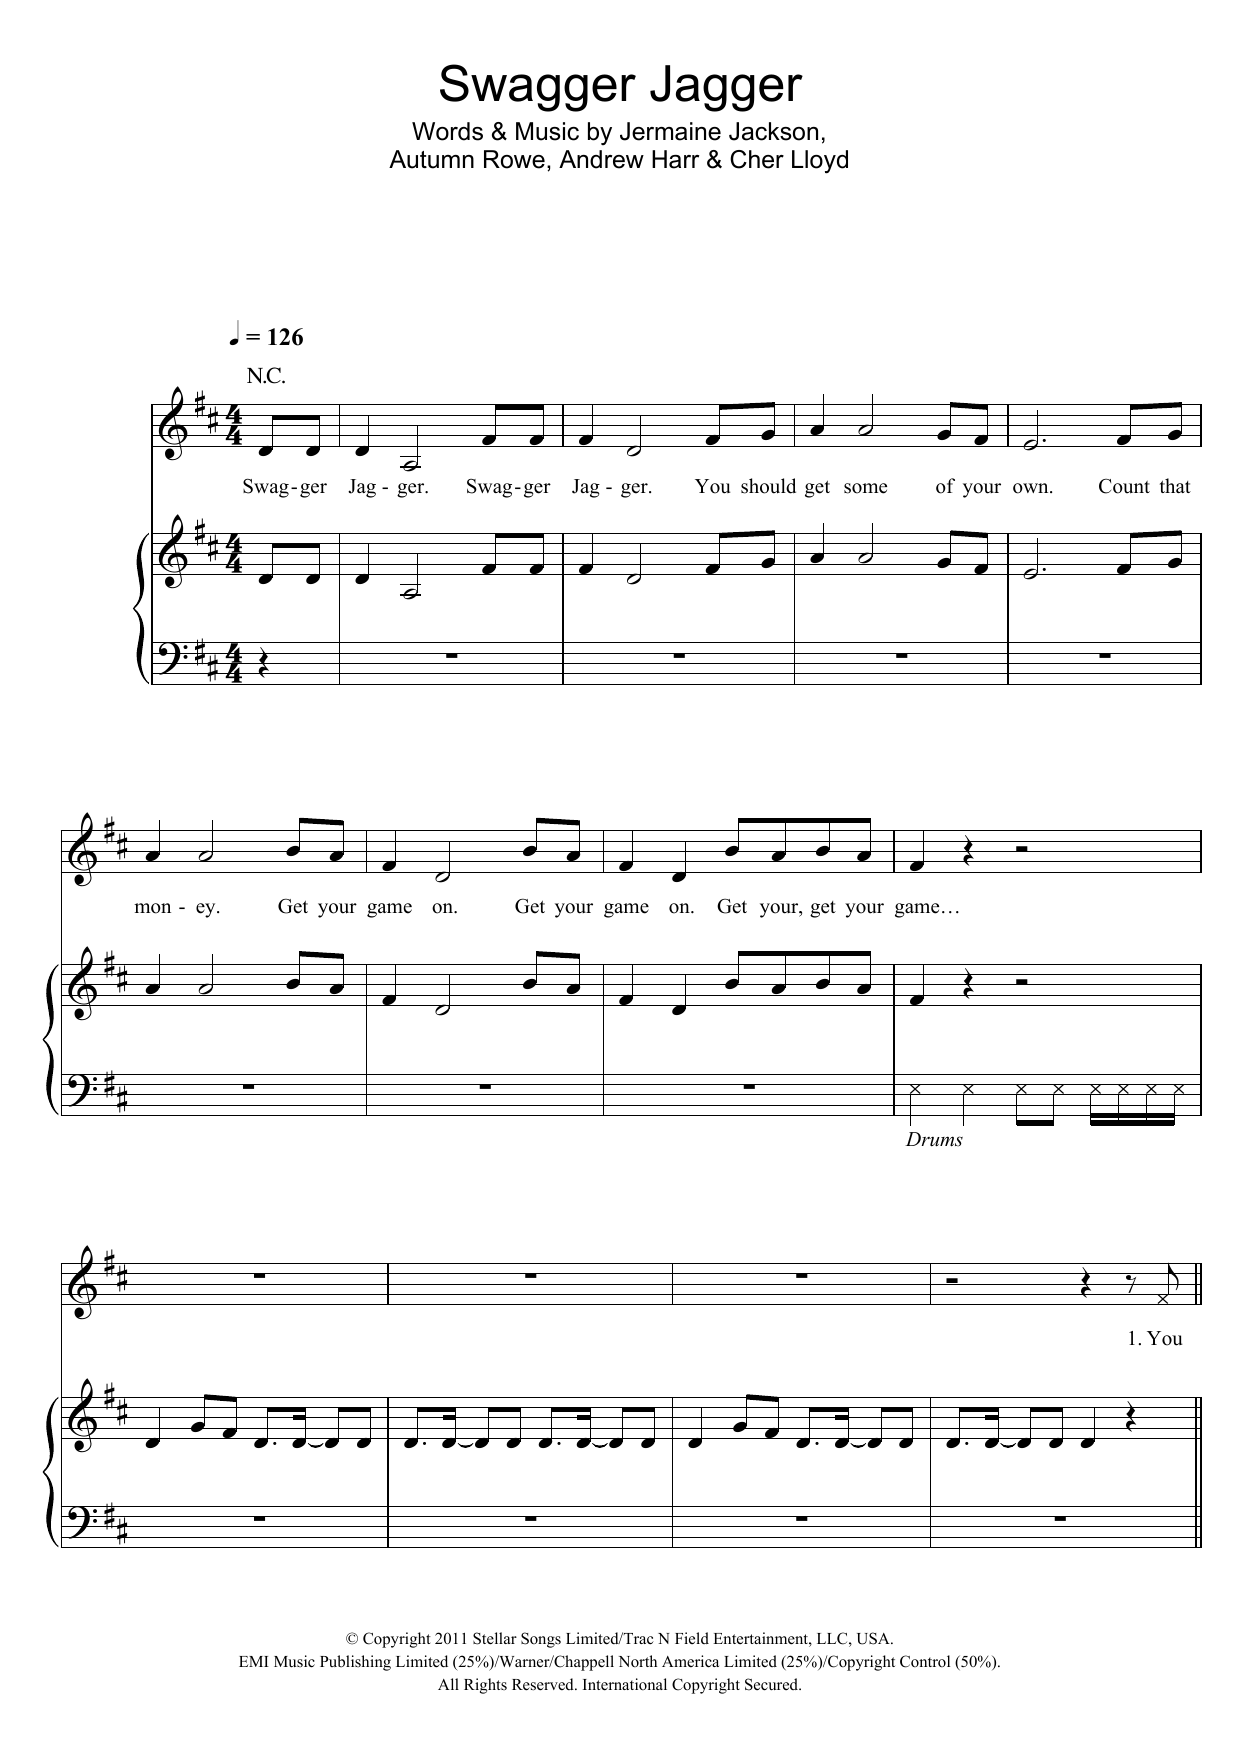 Download Cher Lloyd Swagger Jagger Sheet Music